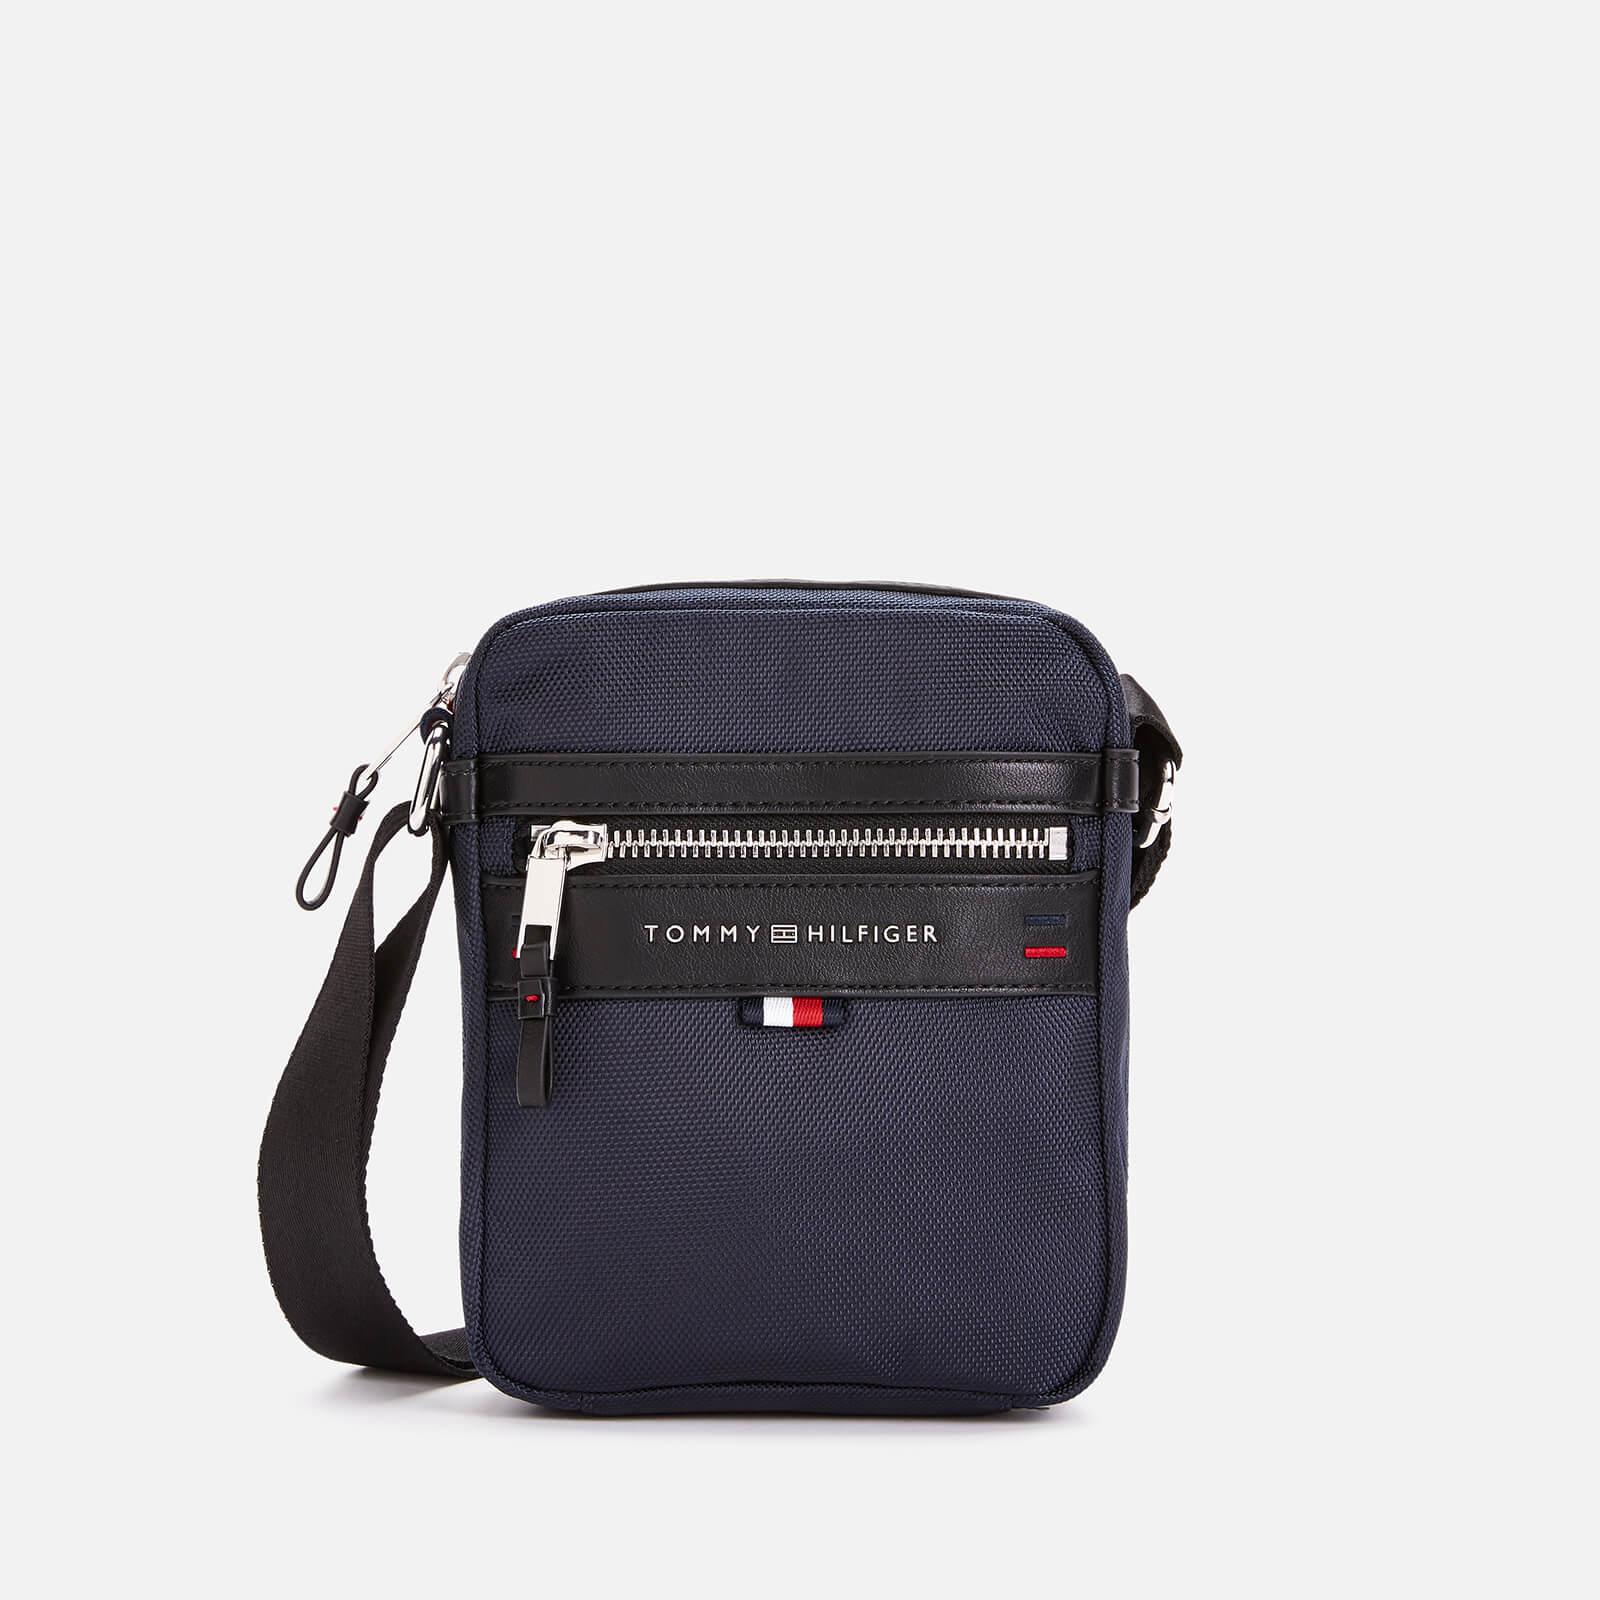 Tommy Hilfiger Elevated Mini Reporter Bag in Navy (Blue) for Men - Lyst